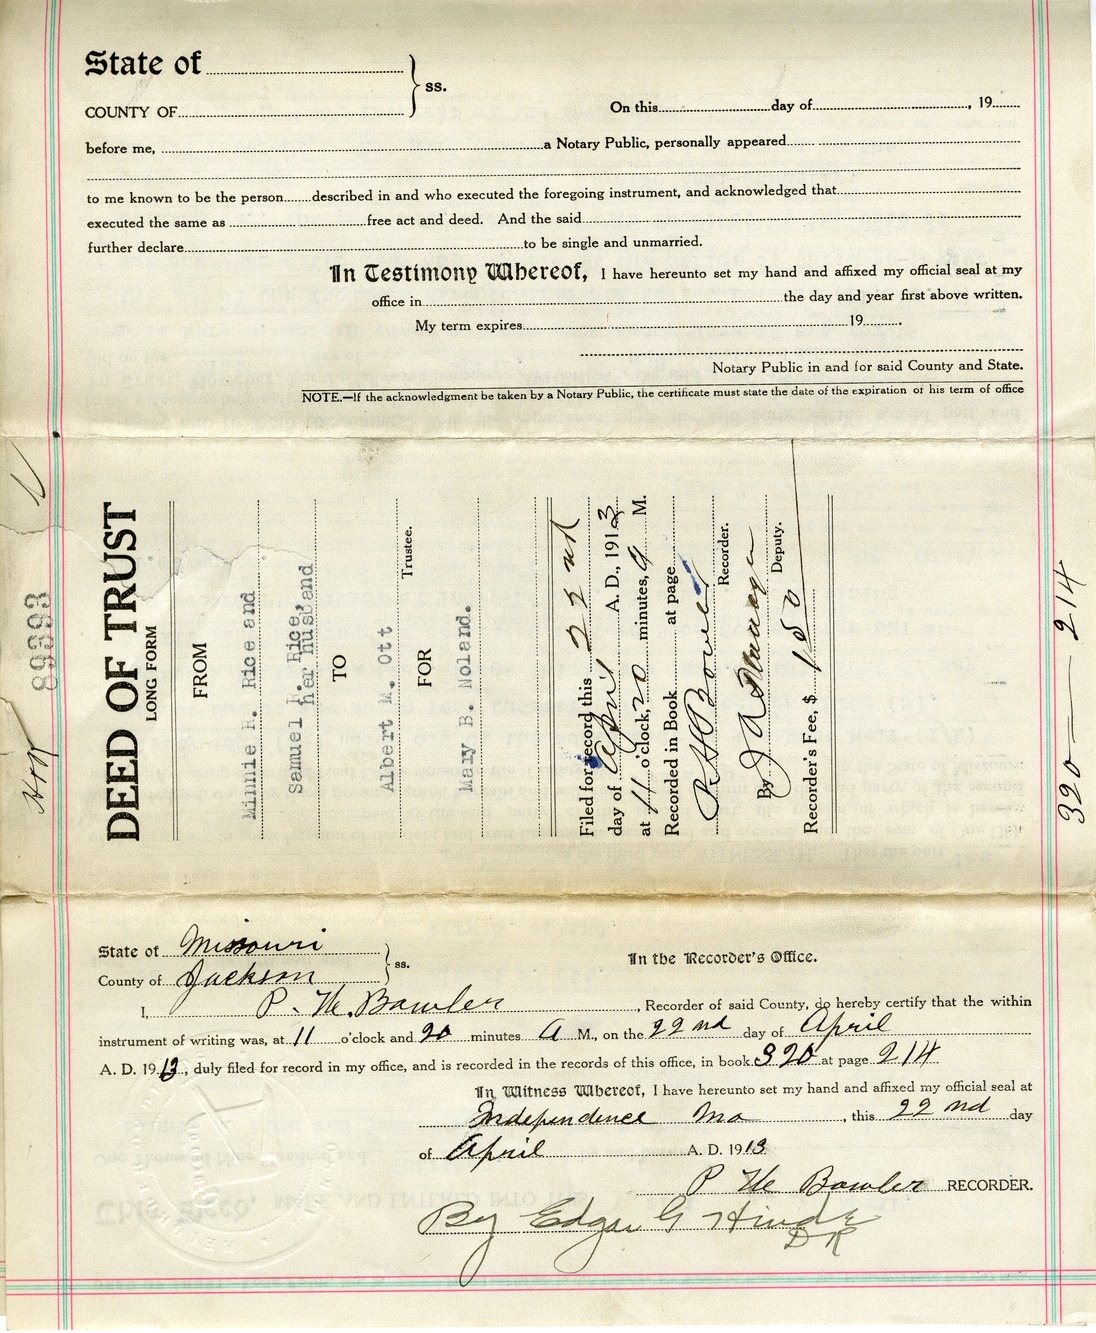 Deed of Trust from Minnie R. Rice and Samuel R. Rice to Albert M. Ott for Mary B. Noland